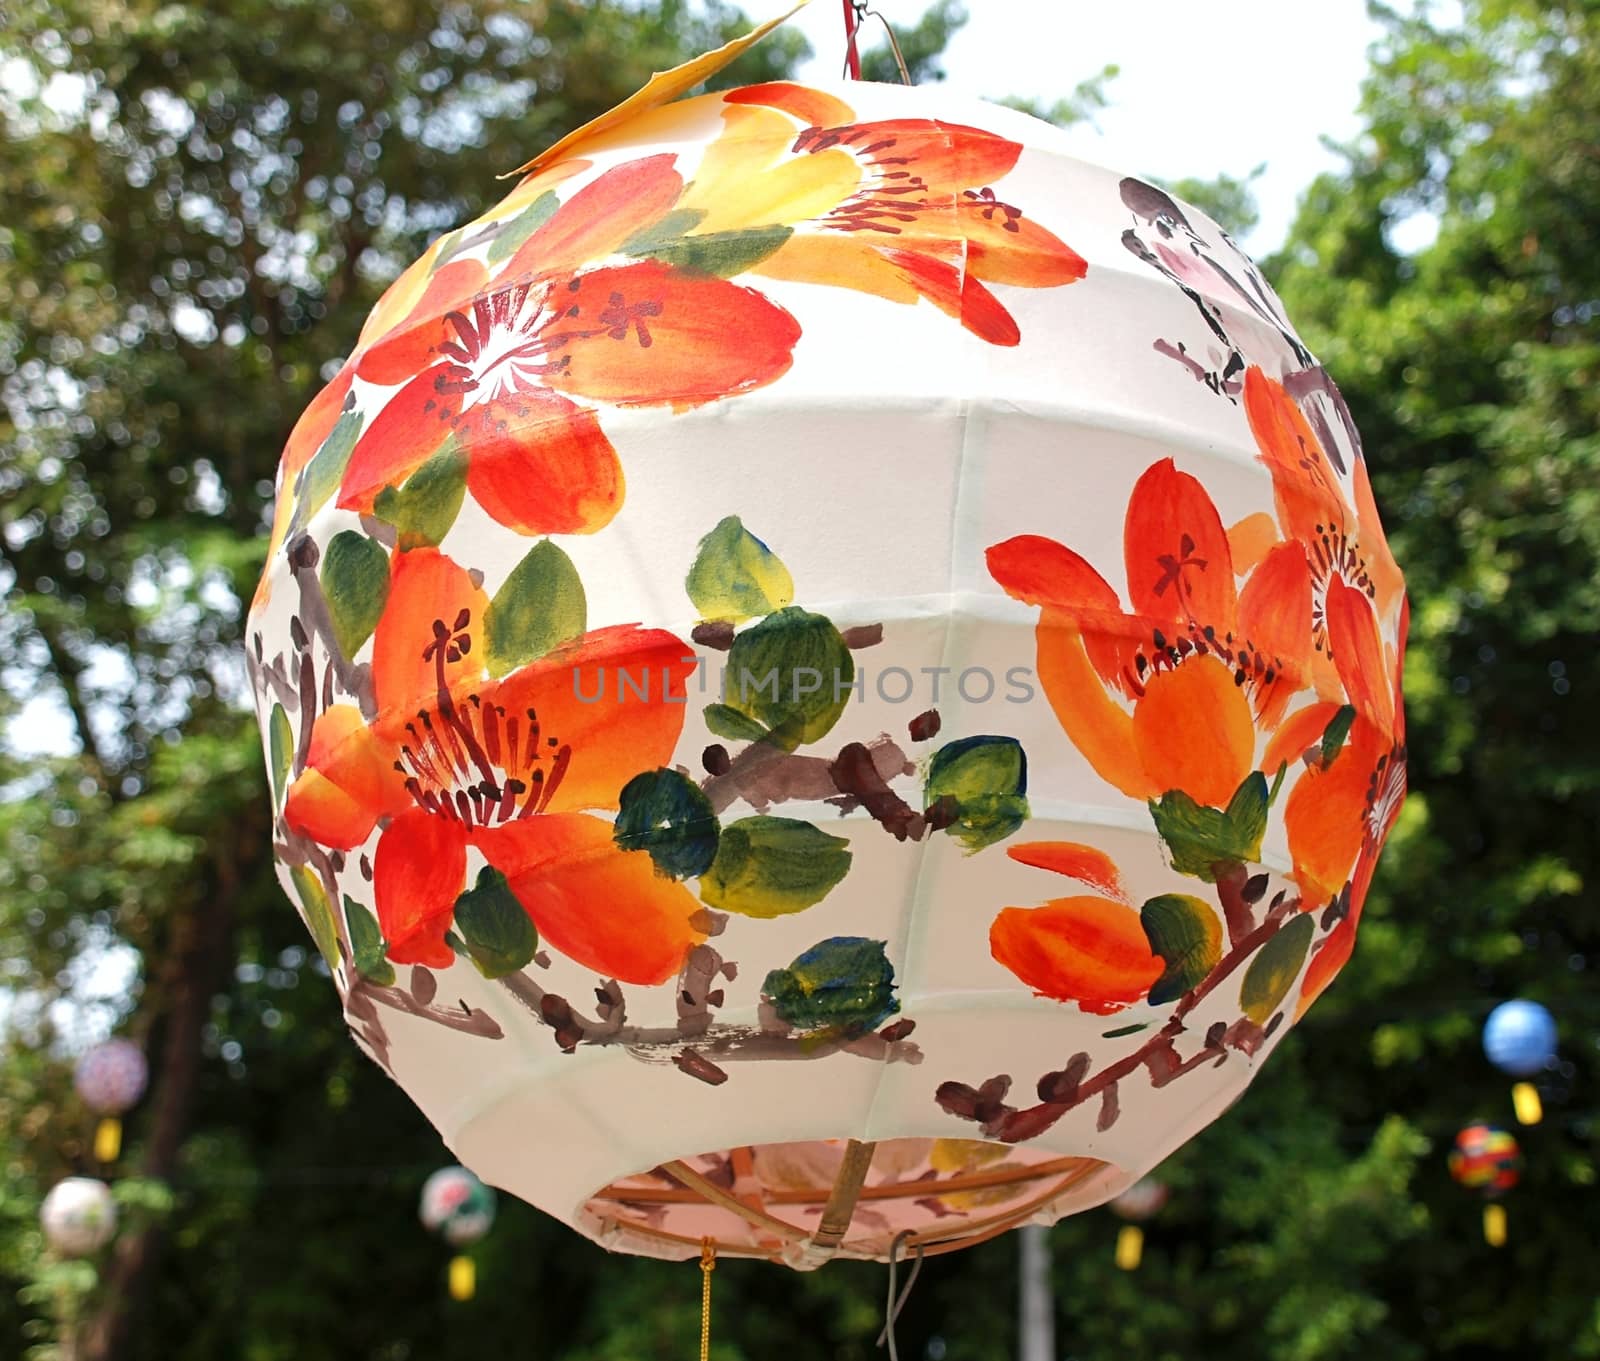 KAOHSIUNG, TAIWAN -- OCTOBER 13: Hand painted Chinese lanterns are on display at the yearly Wannian Folklore Festival on October 13, 2013 in Kaohsiung.